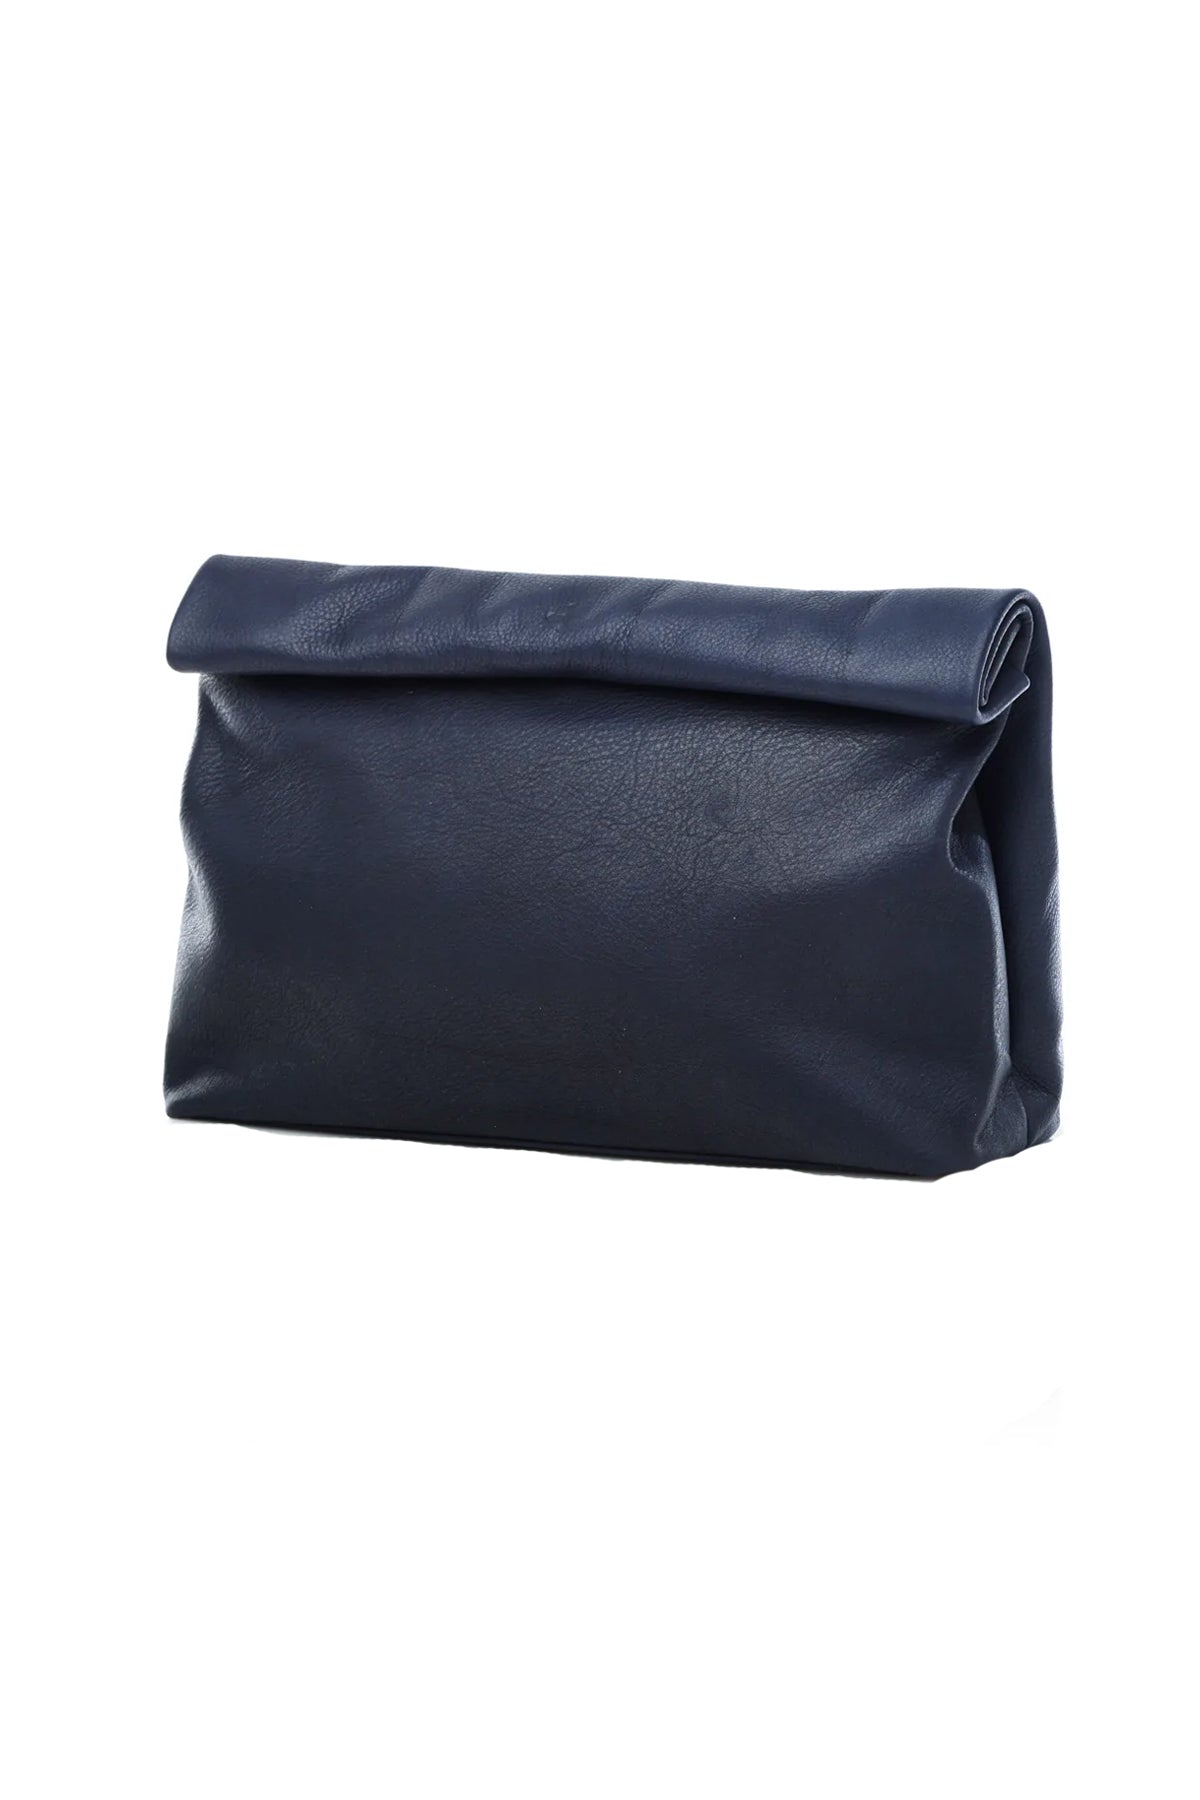 lunch clutch - navy pebble